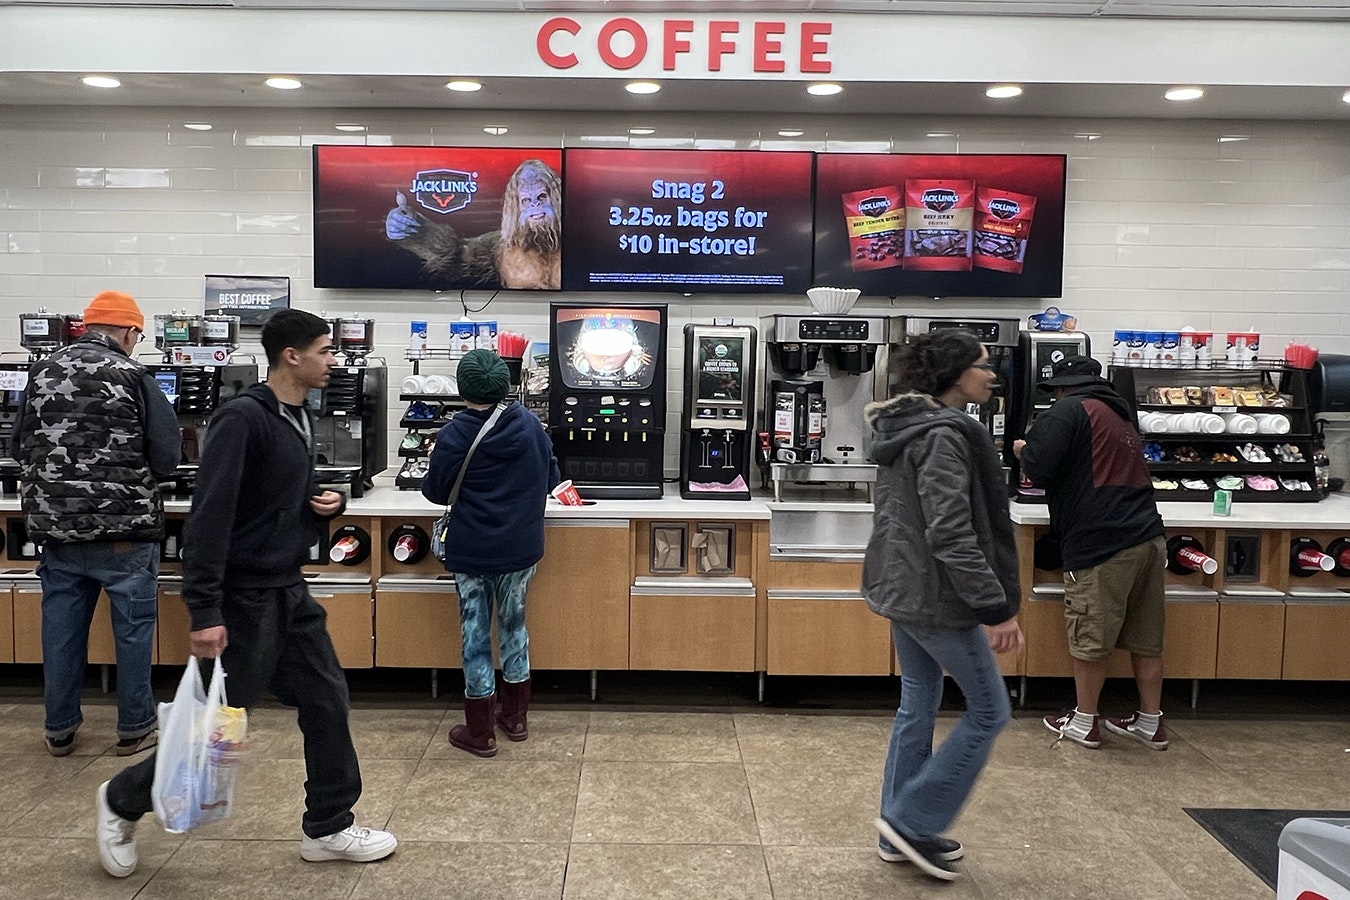 Activity around the coffee counter at the Pilot Flying J truck stop in Cheyenne off Interstate 25 picks up at about 6 a.m.